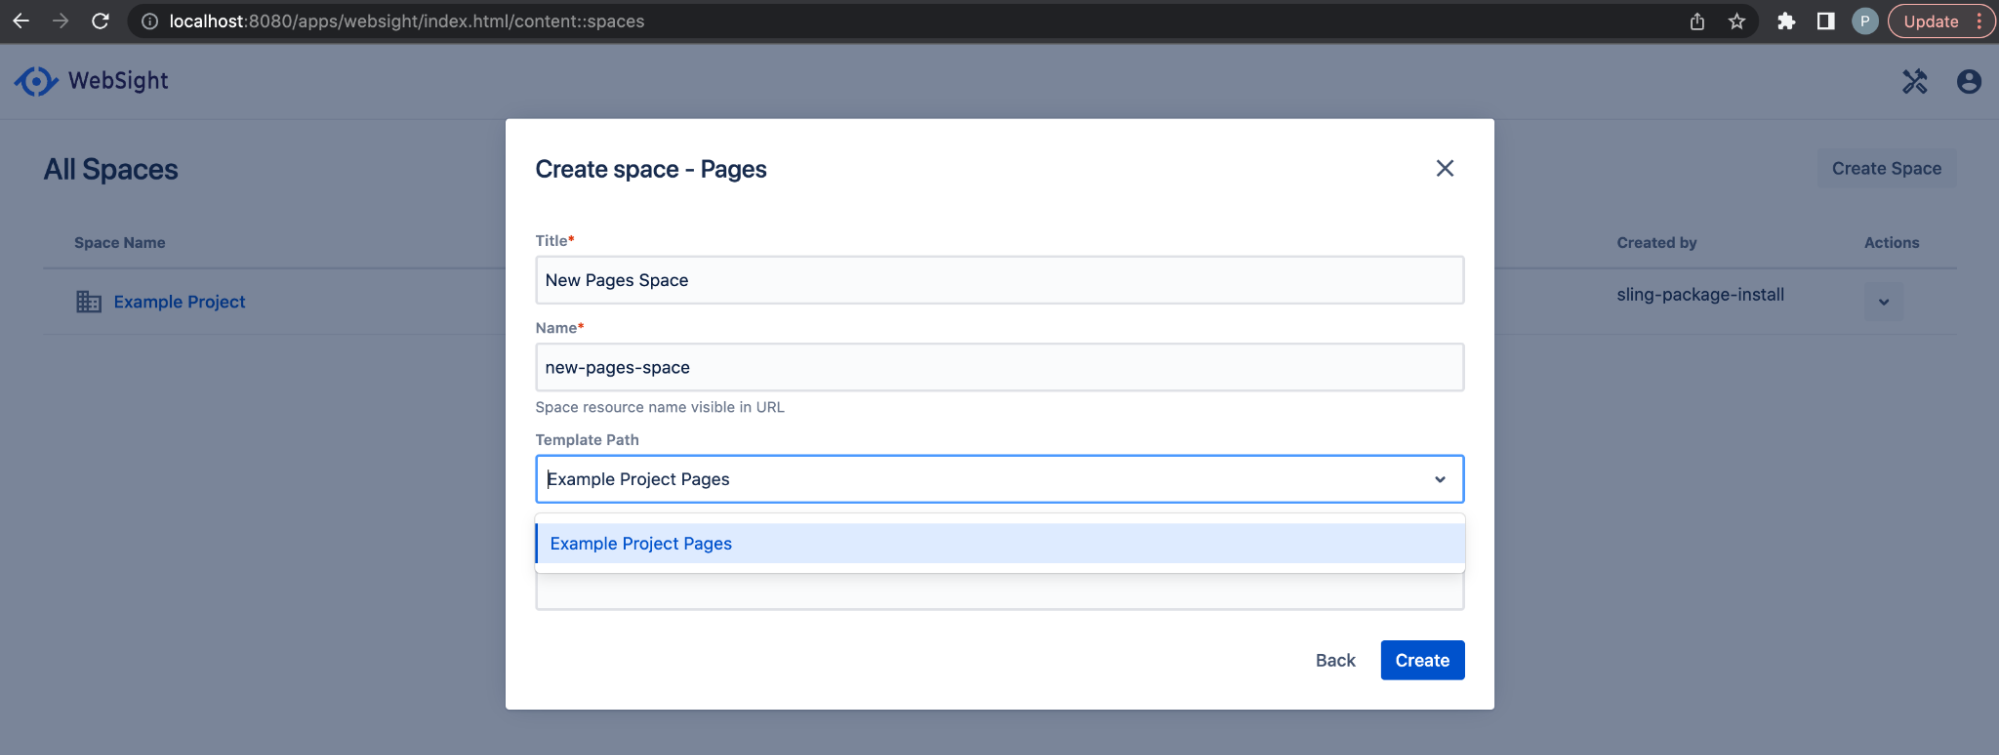 Create space - pages configuration